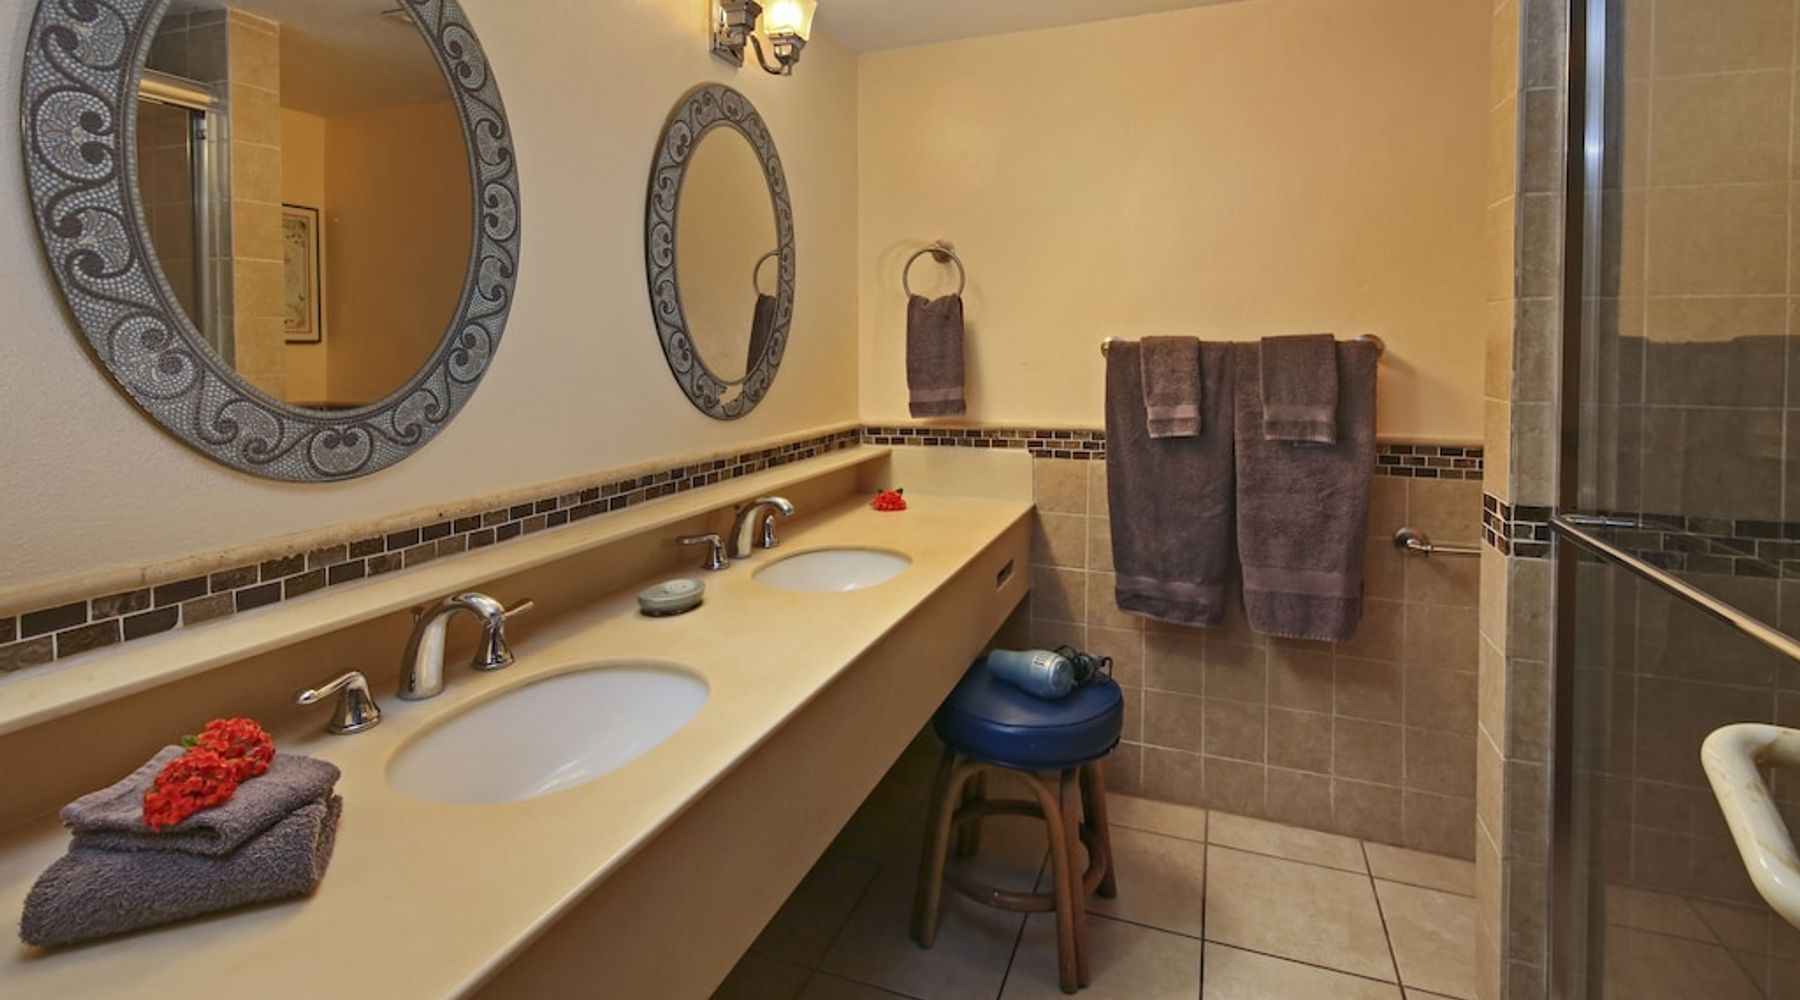 A huge bathroom fully-equipped with your needs